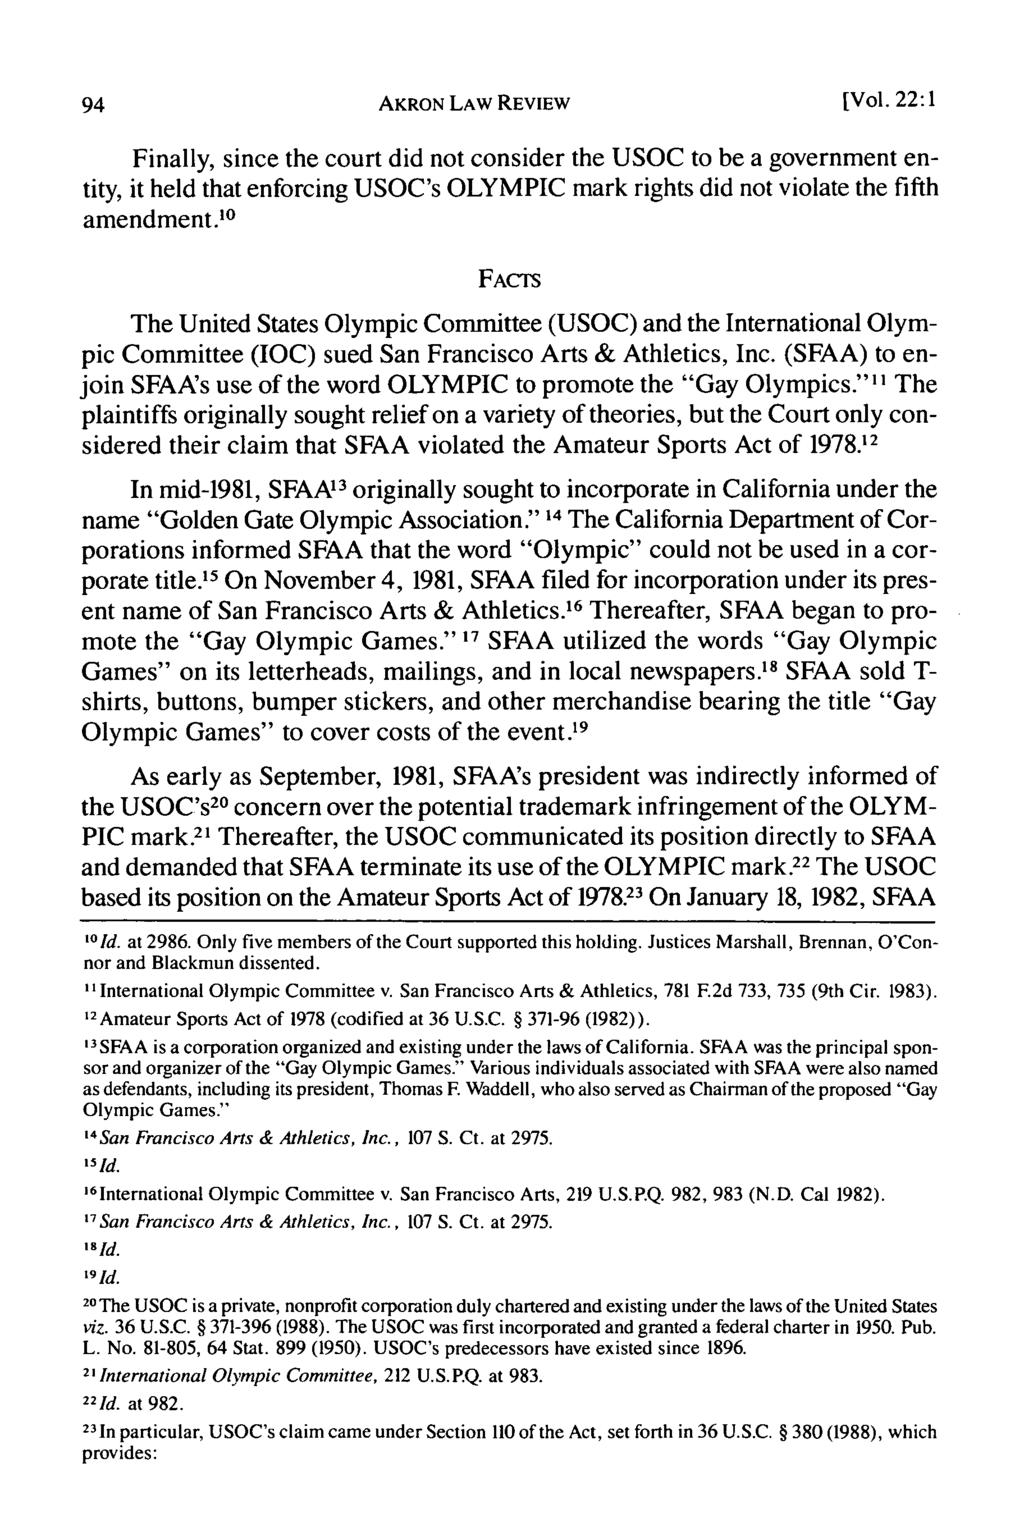 AKRON LAW REVIEW [Vol. 22:1 Finally, since the court did not consider the USOC to be a government entity, it held that enforcing USOC's OLYMPIC mark rights did not violate the fifth amendment.